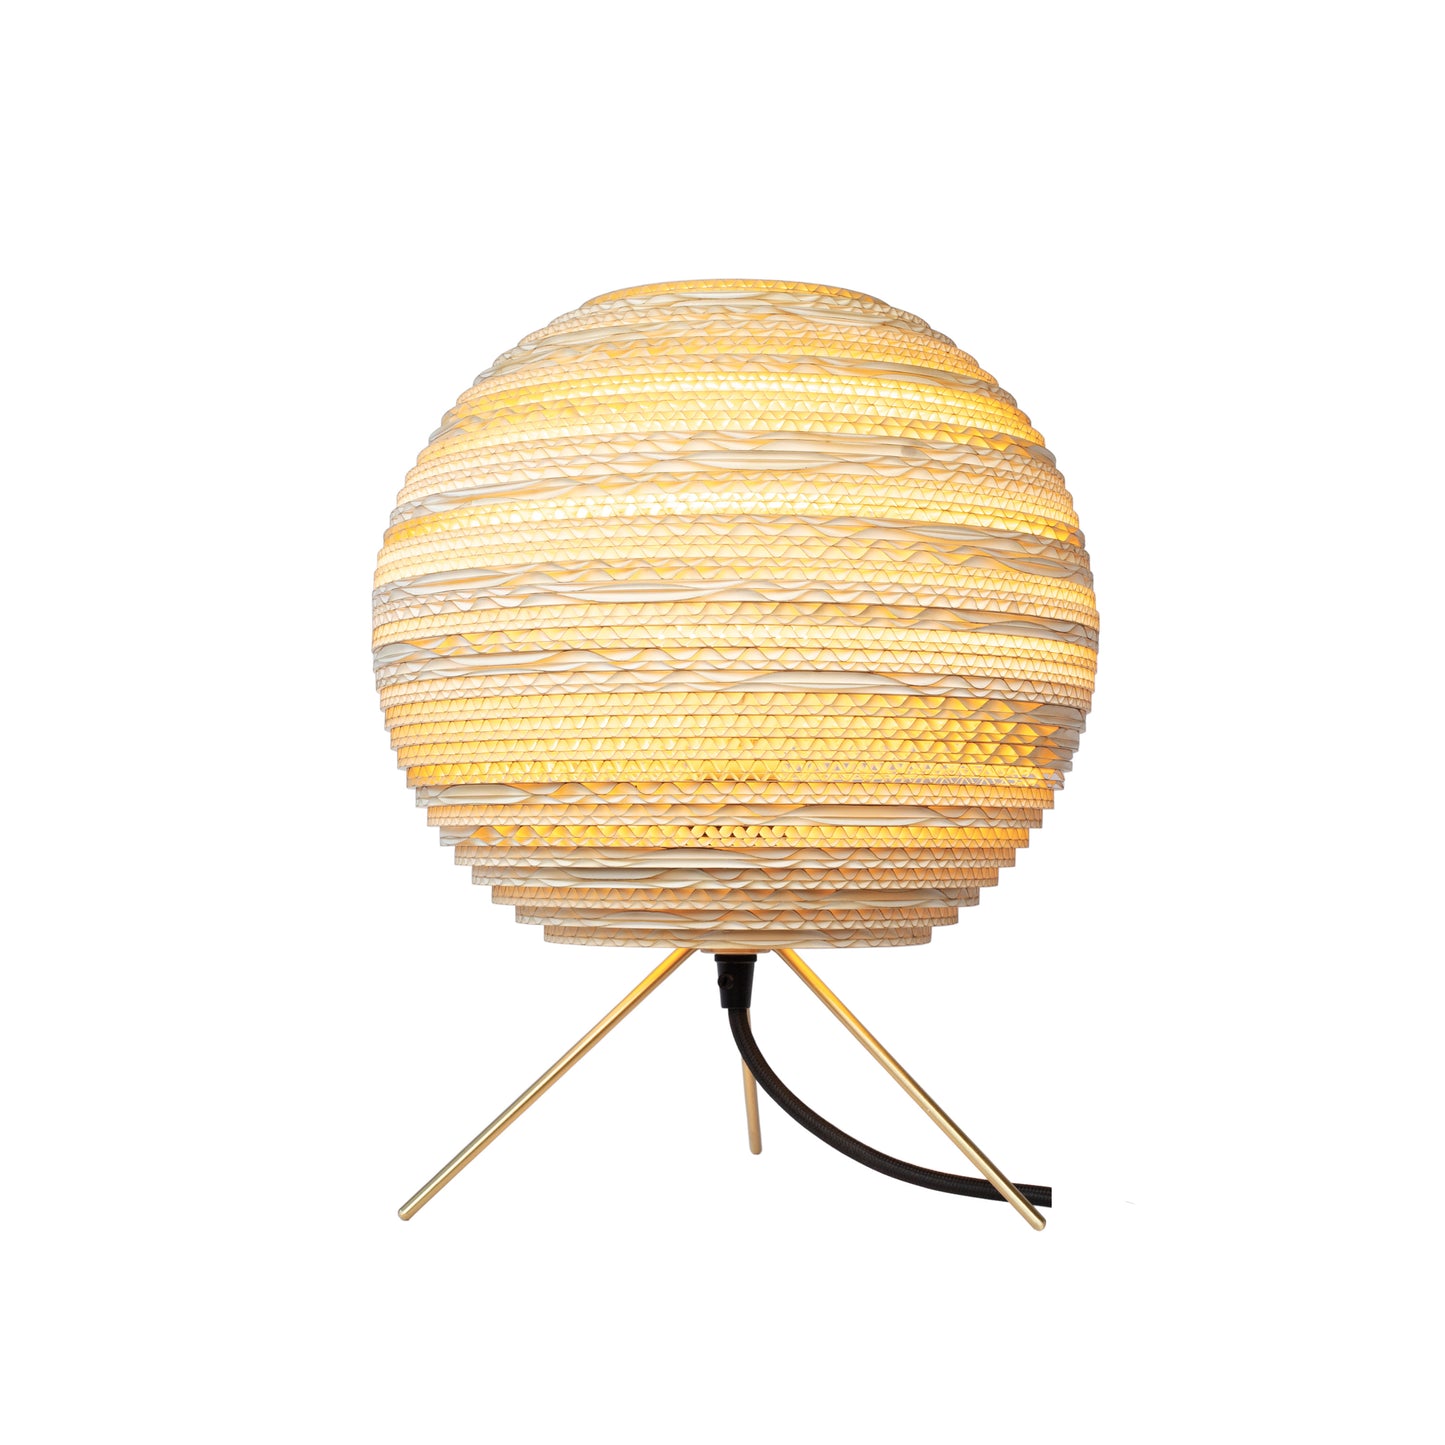 Graypants Moon Table Lamp - Artistic Illumination for Your Space